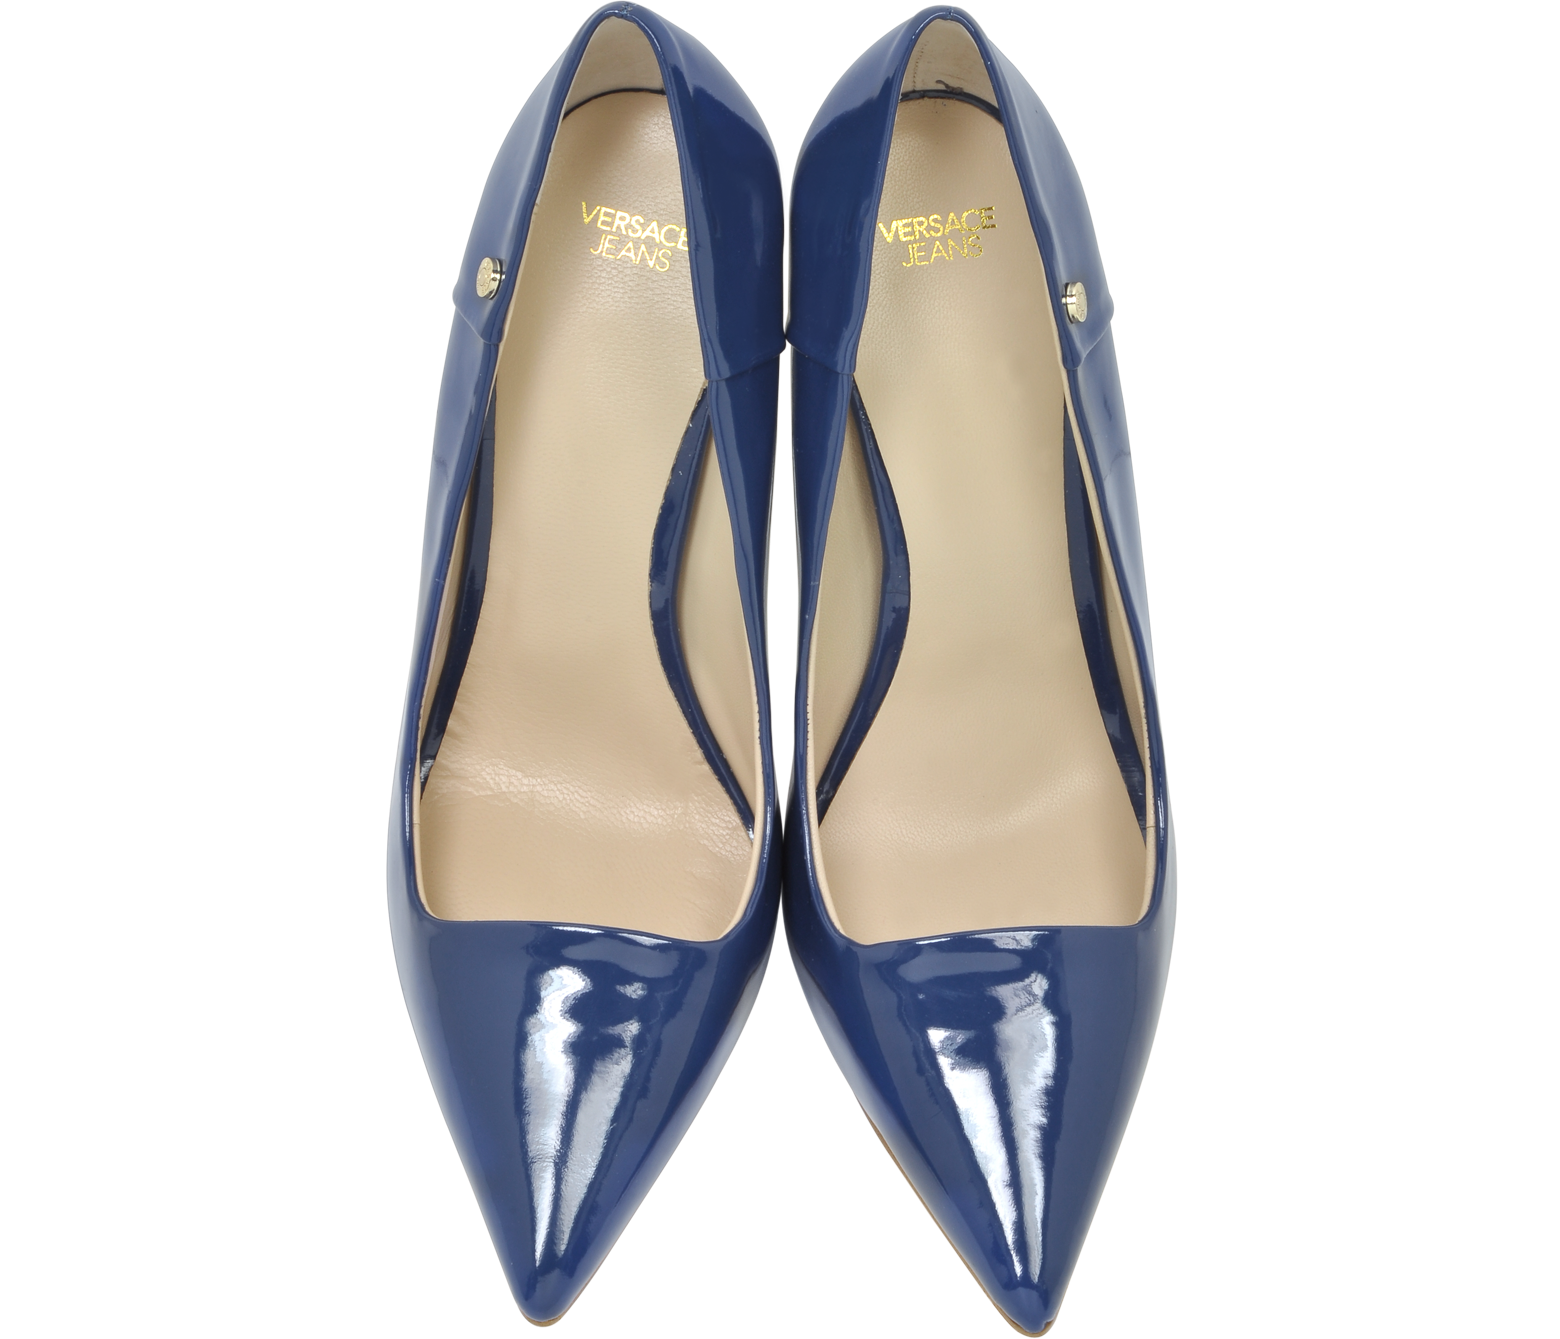 Versace Jeans Patent Eco Leather Pump 36 IT/EU at FORZIERI